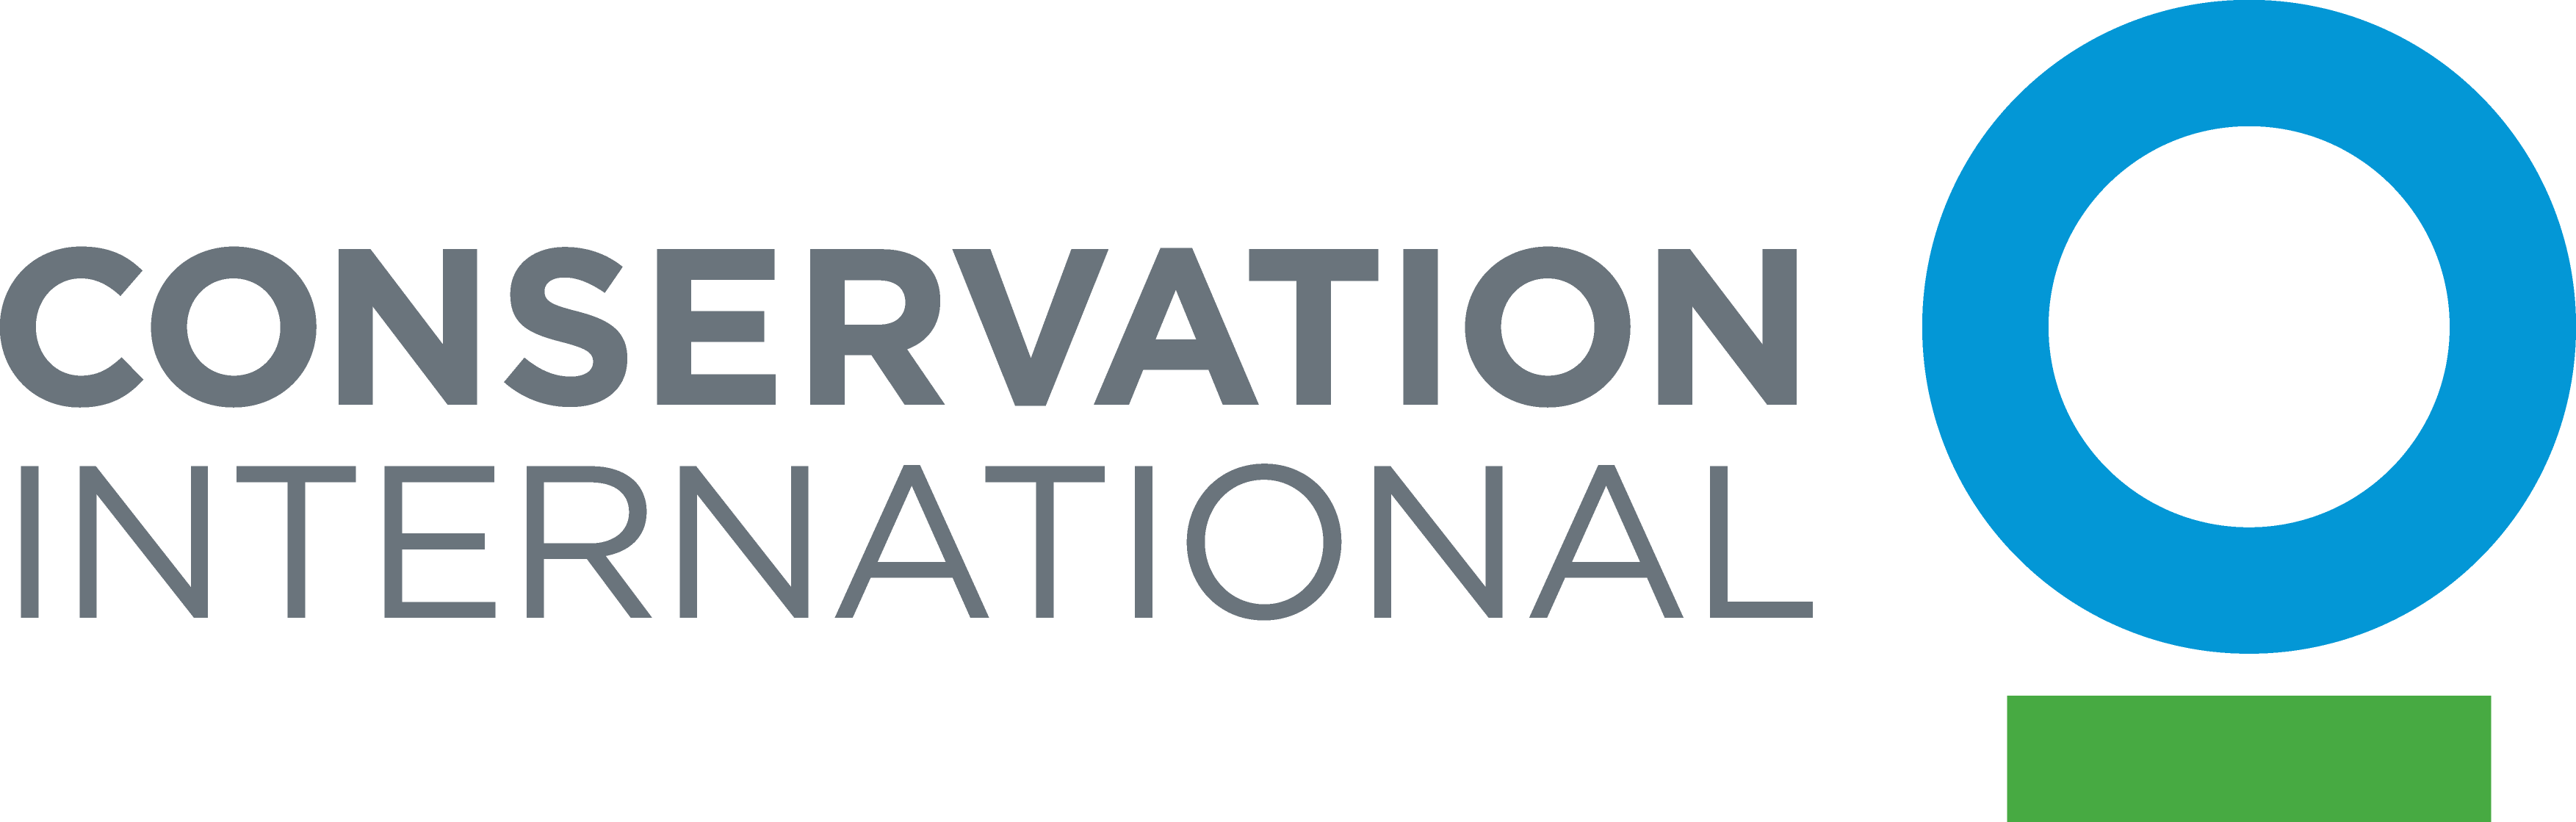 Conservation Logo - Conservation International Pacific Islands | PIPAP